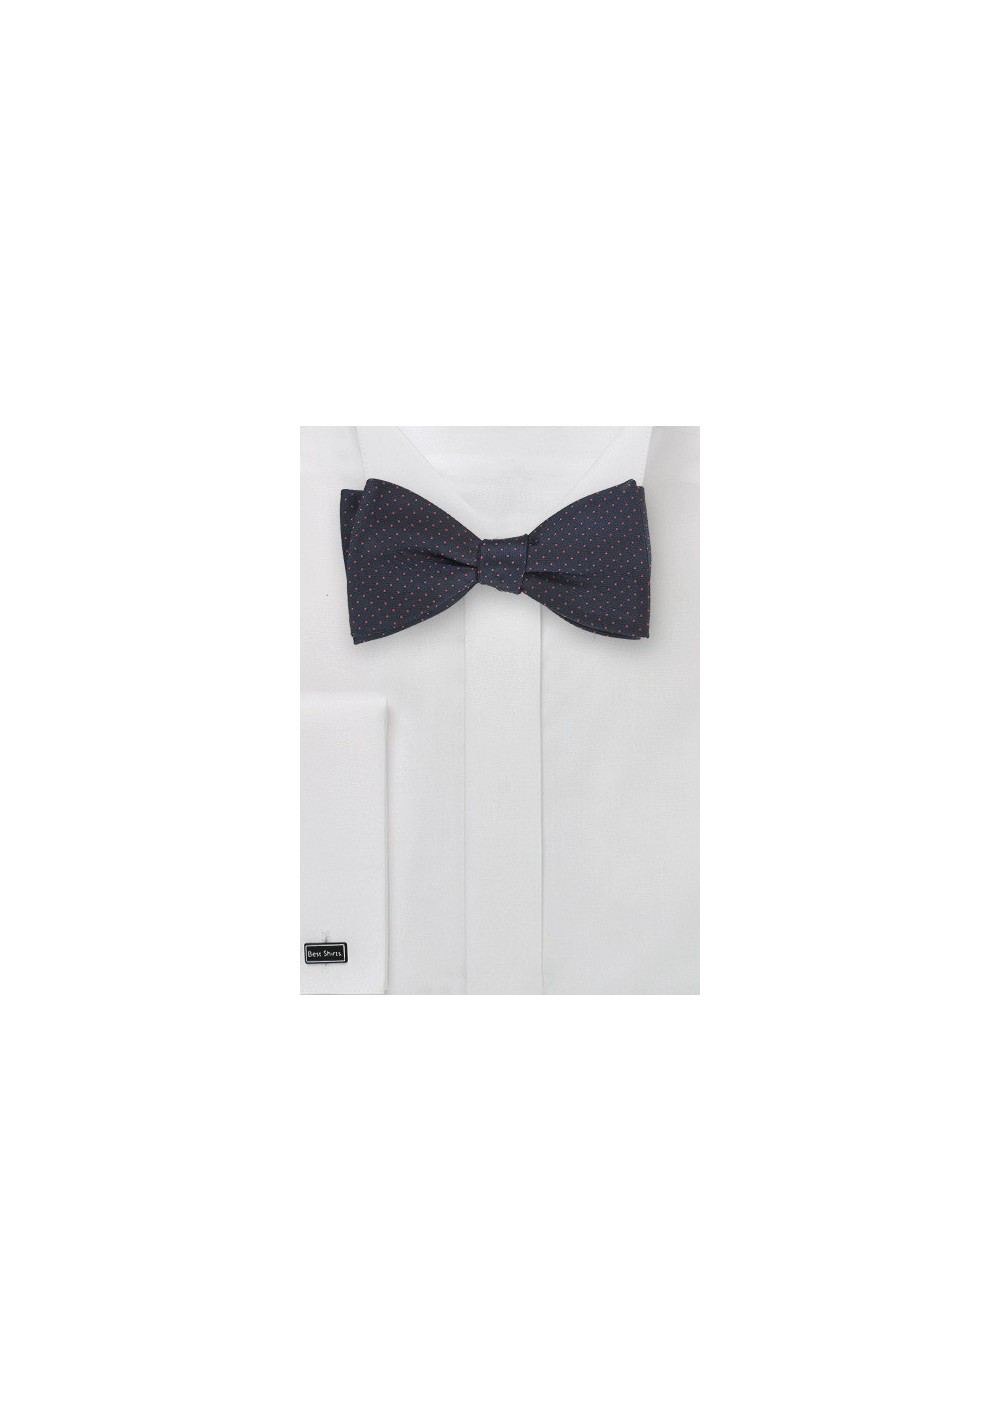 Navy Blue Bow Tie with Coral Pin Dots